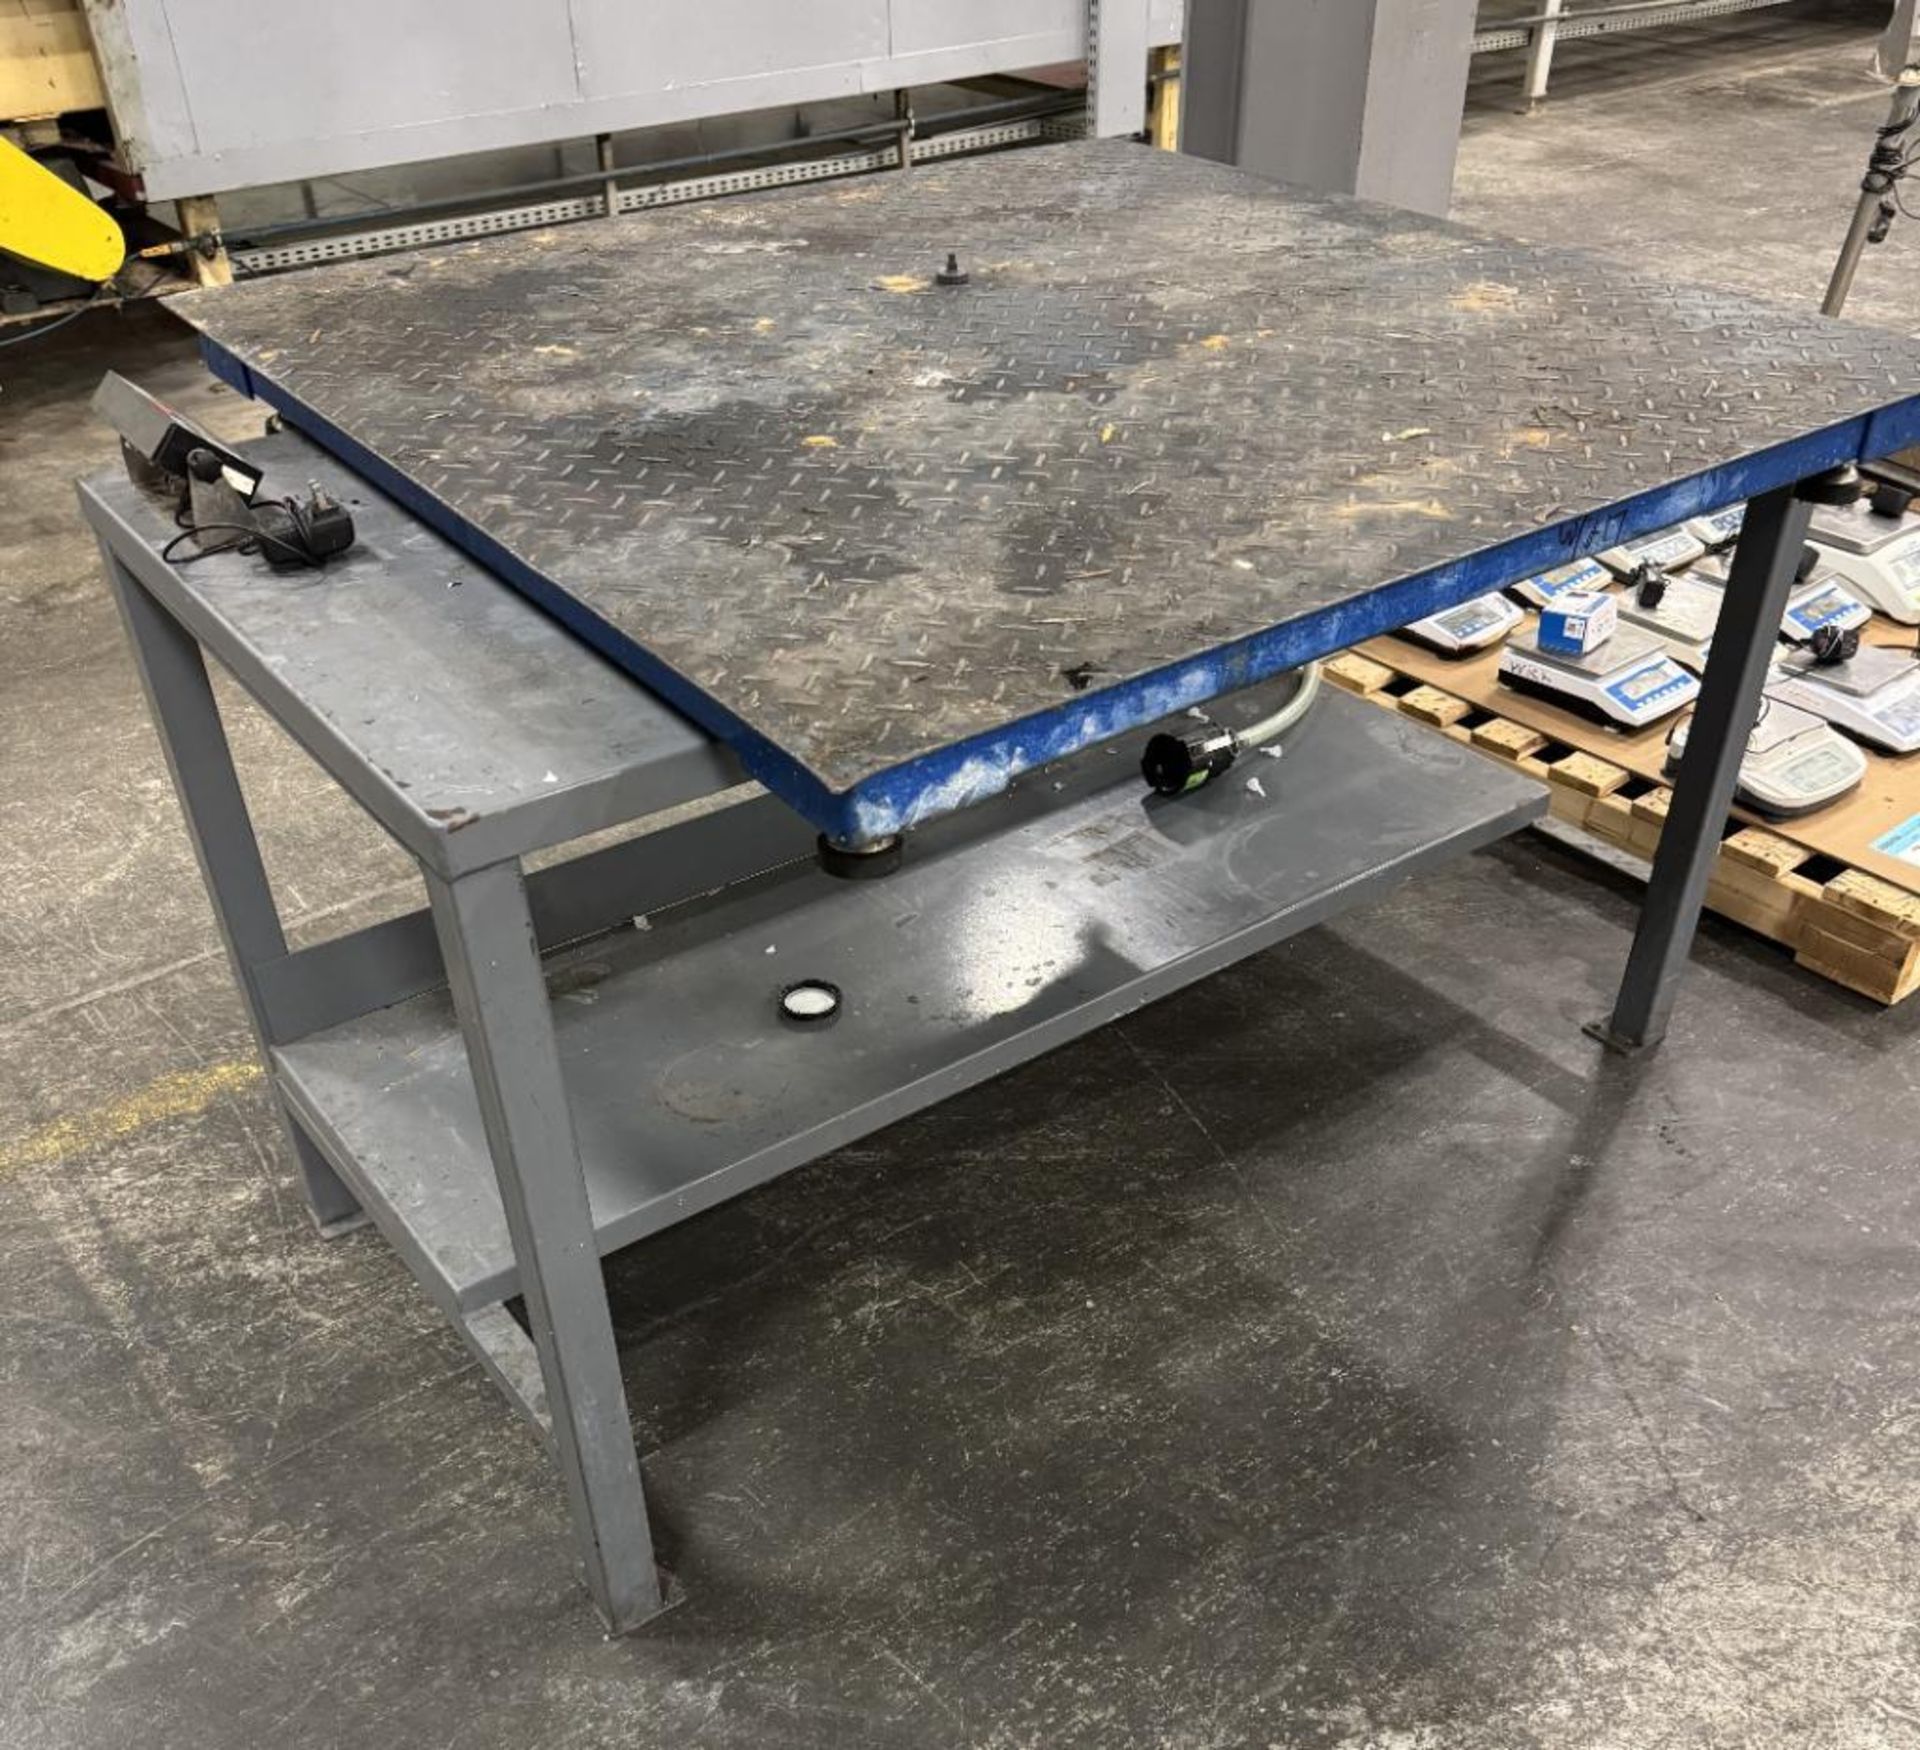 Lot Consisting Of: (1) Prime Scale 48" x 48" Floor Scale with controller, (1) Uline steel work table - Image 2 of 5